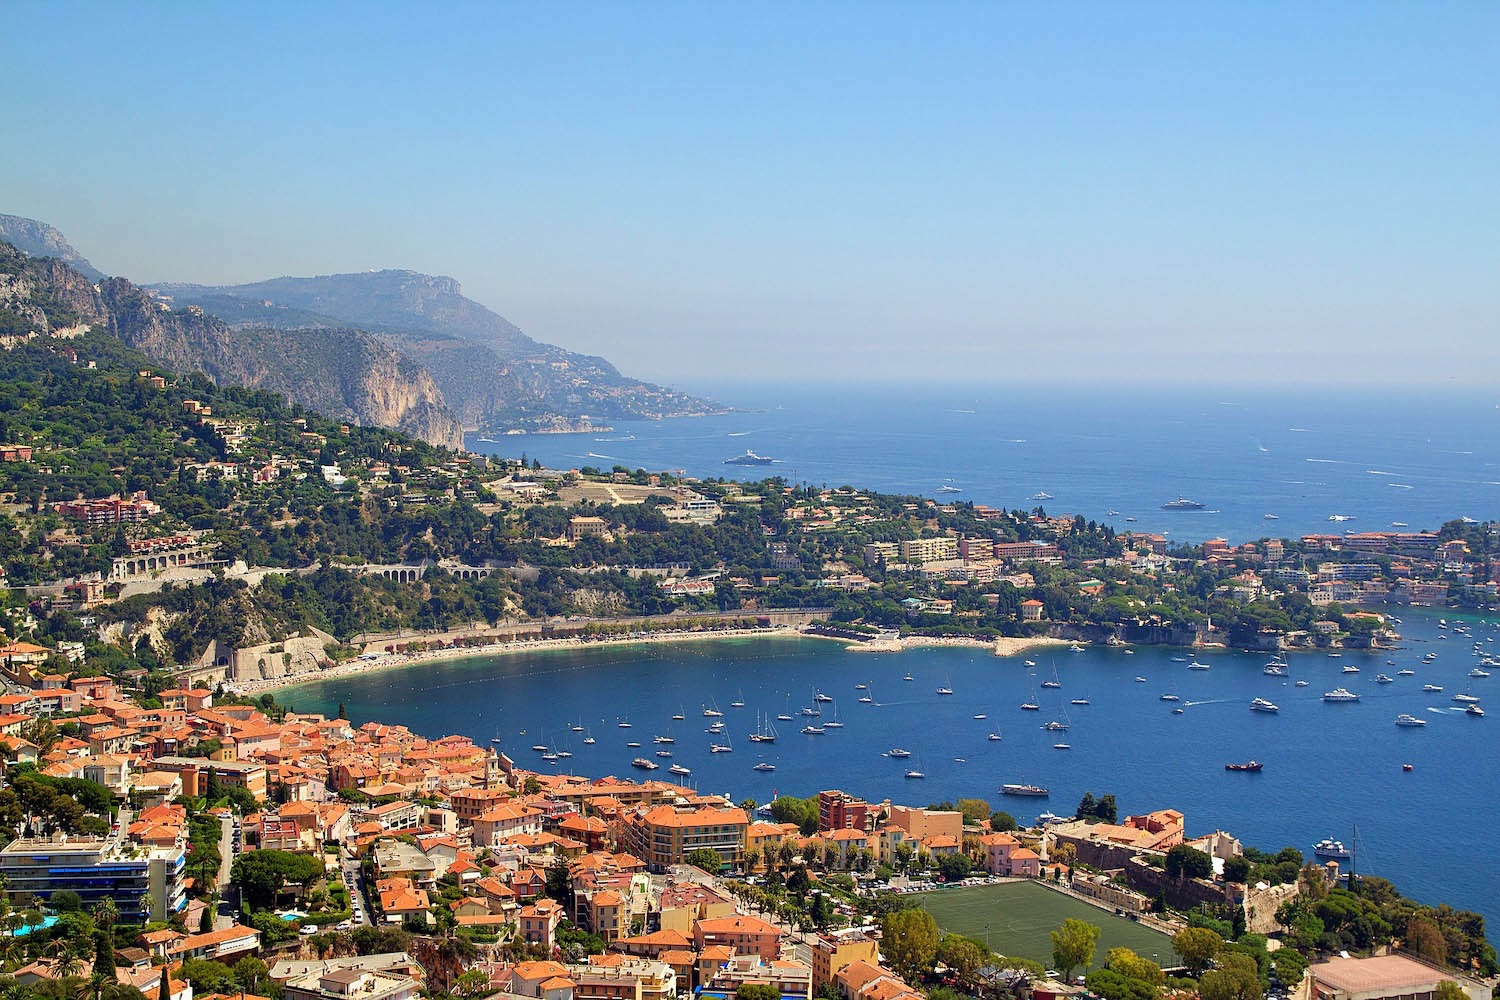 Bay of Nice, France with red roof houses, a sandy beach, and clear blue water with lots of boats